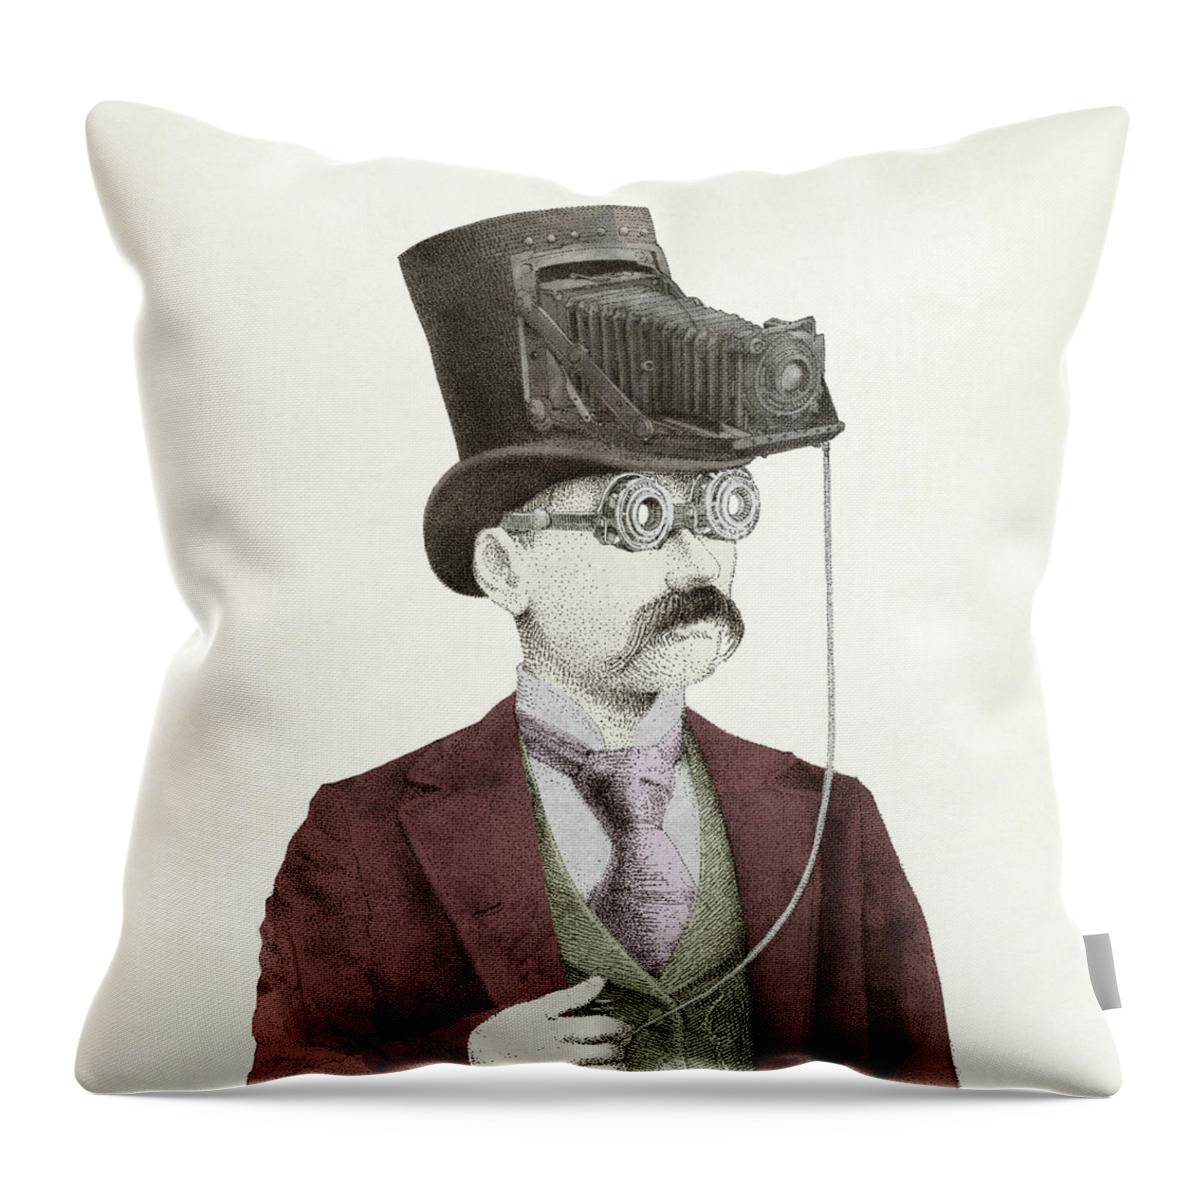 Photography Throw Pillow featuring the drawing The Photographer by Eric Fan